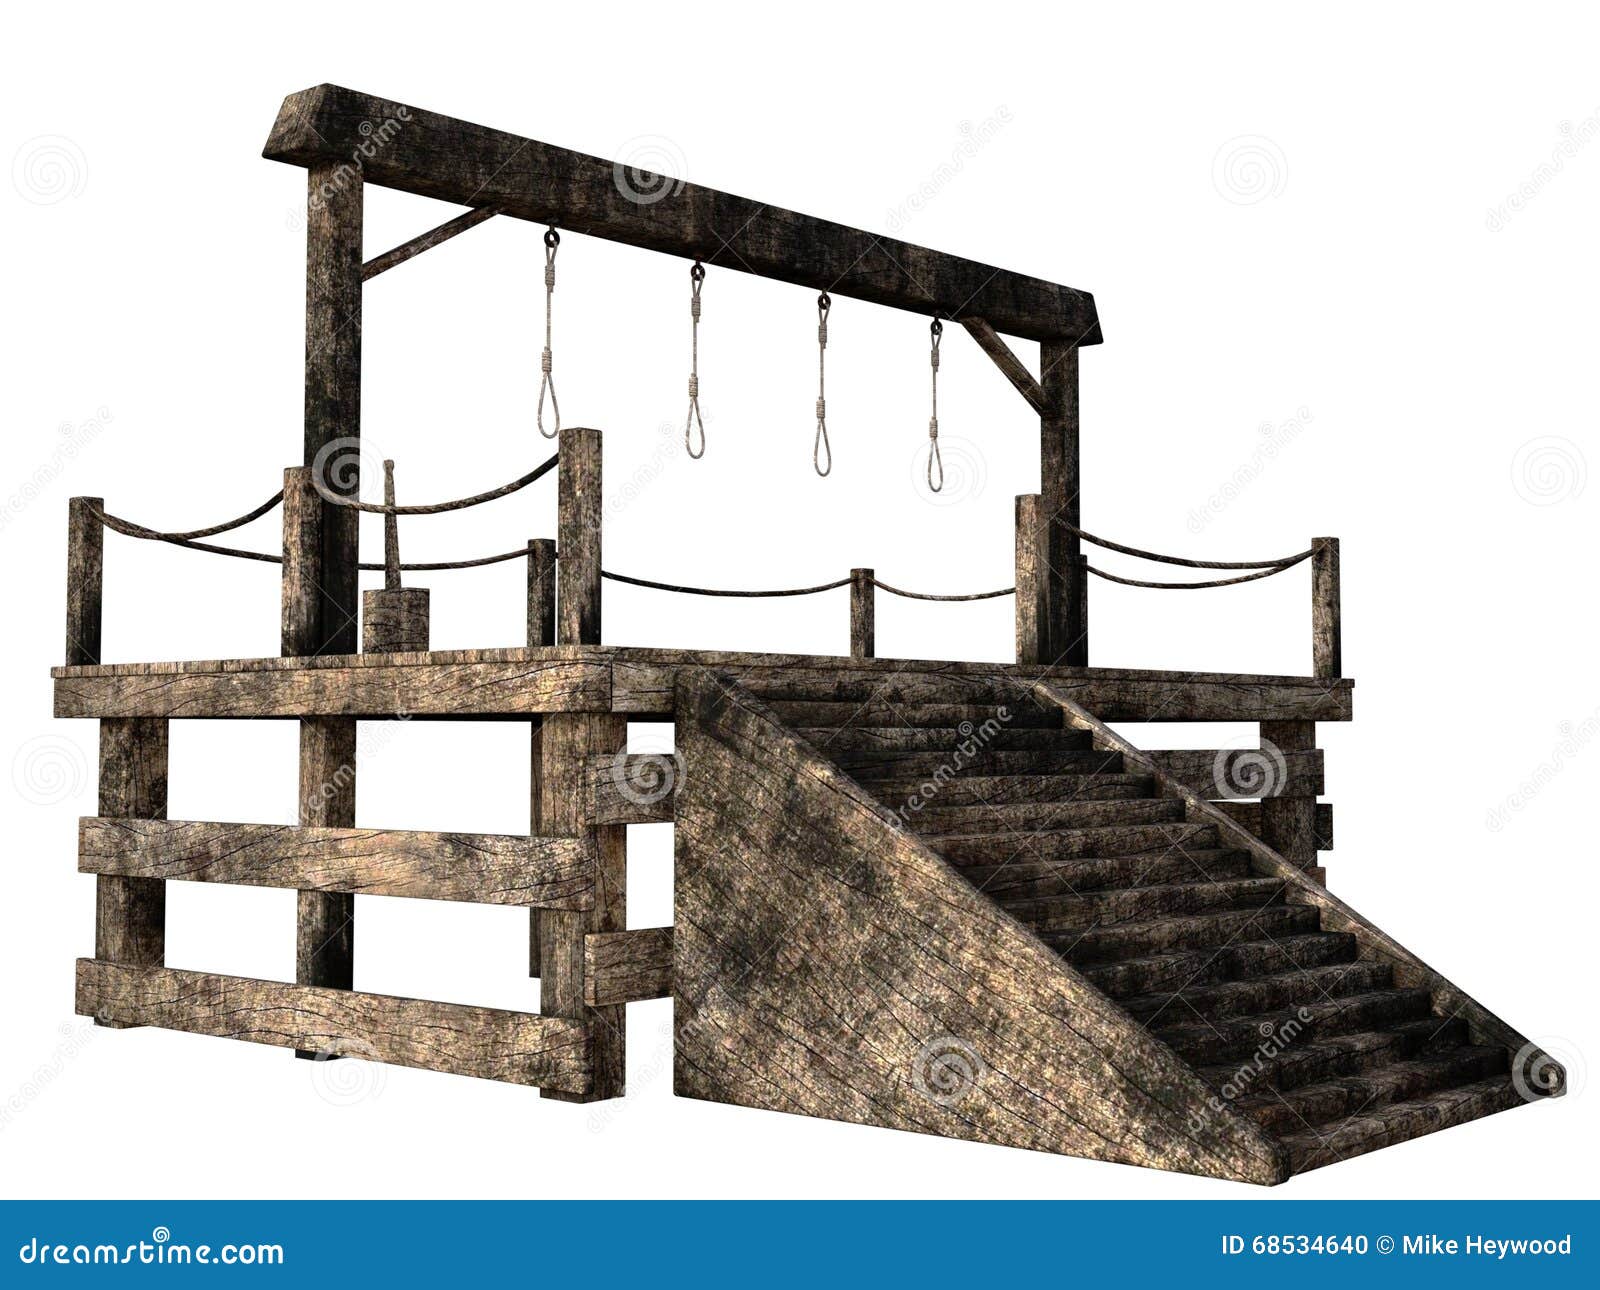 four-person-gallows-wooden-nooses-68534640.jpg